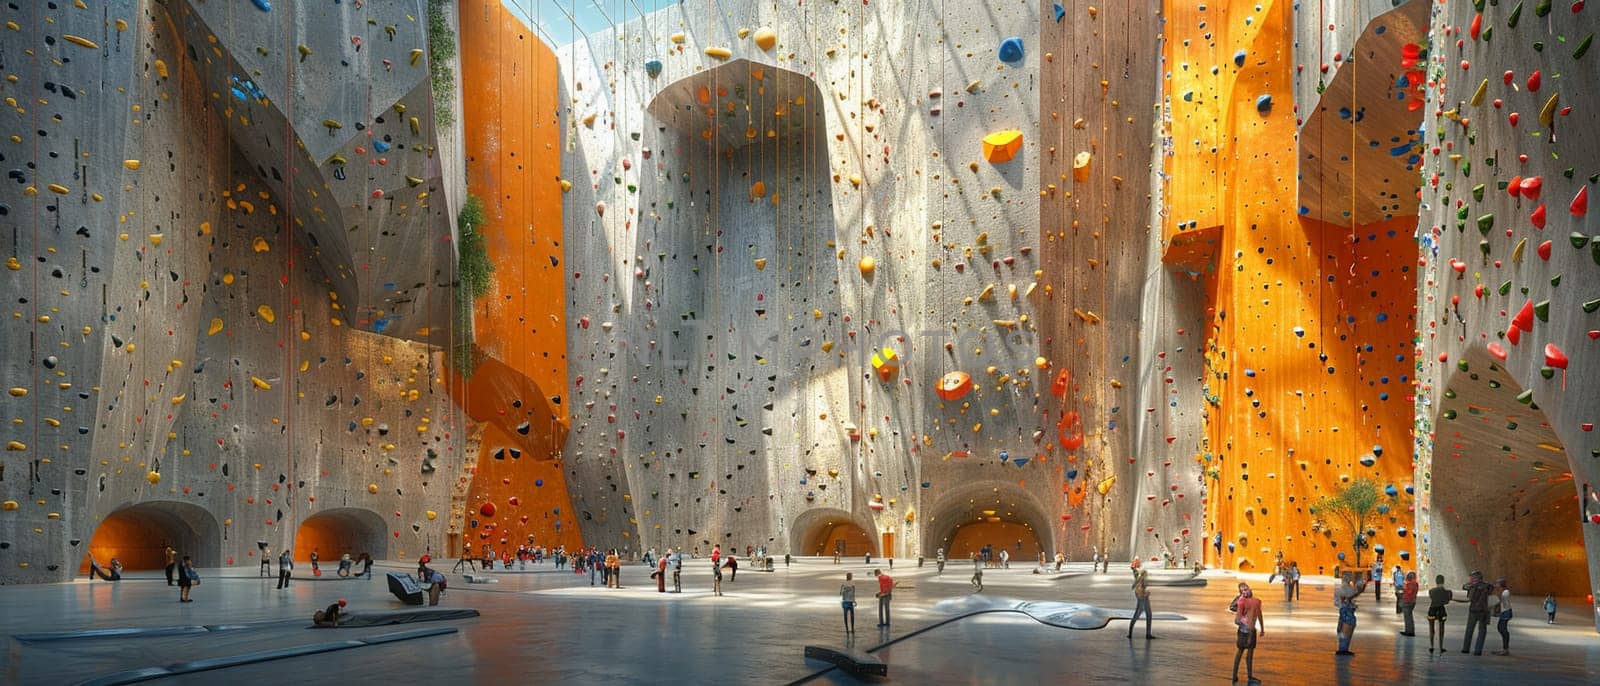 Vertical Climbing Arena Reaches New Peaks in Business of Fitness and Recreation, Climbing harnesses and vertical routes reach new peaks and fitness recreation in the vertical climbing arena business.